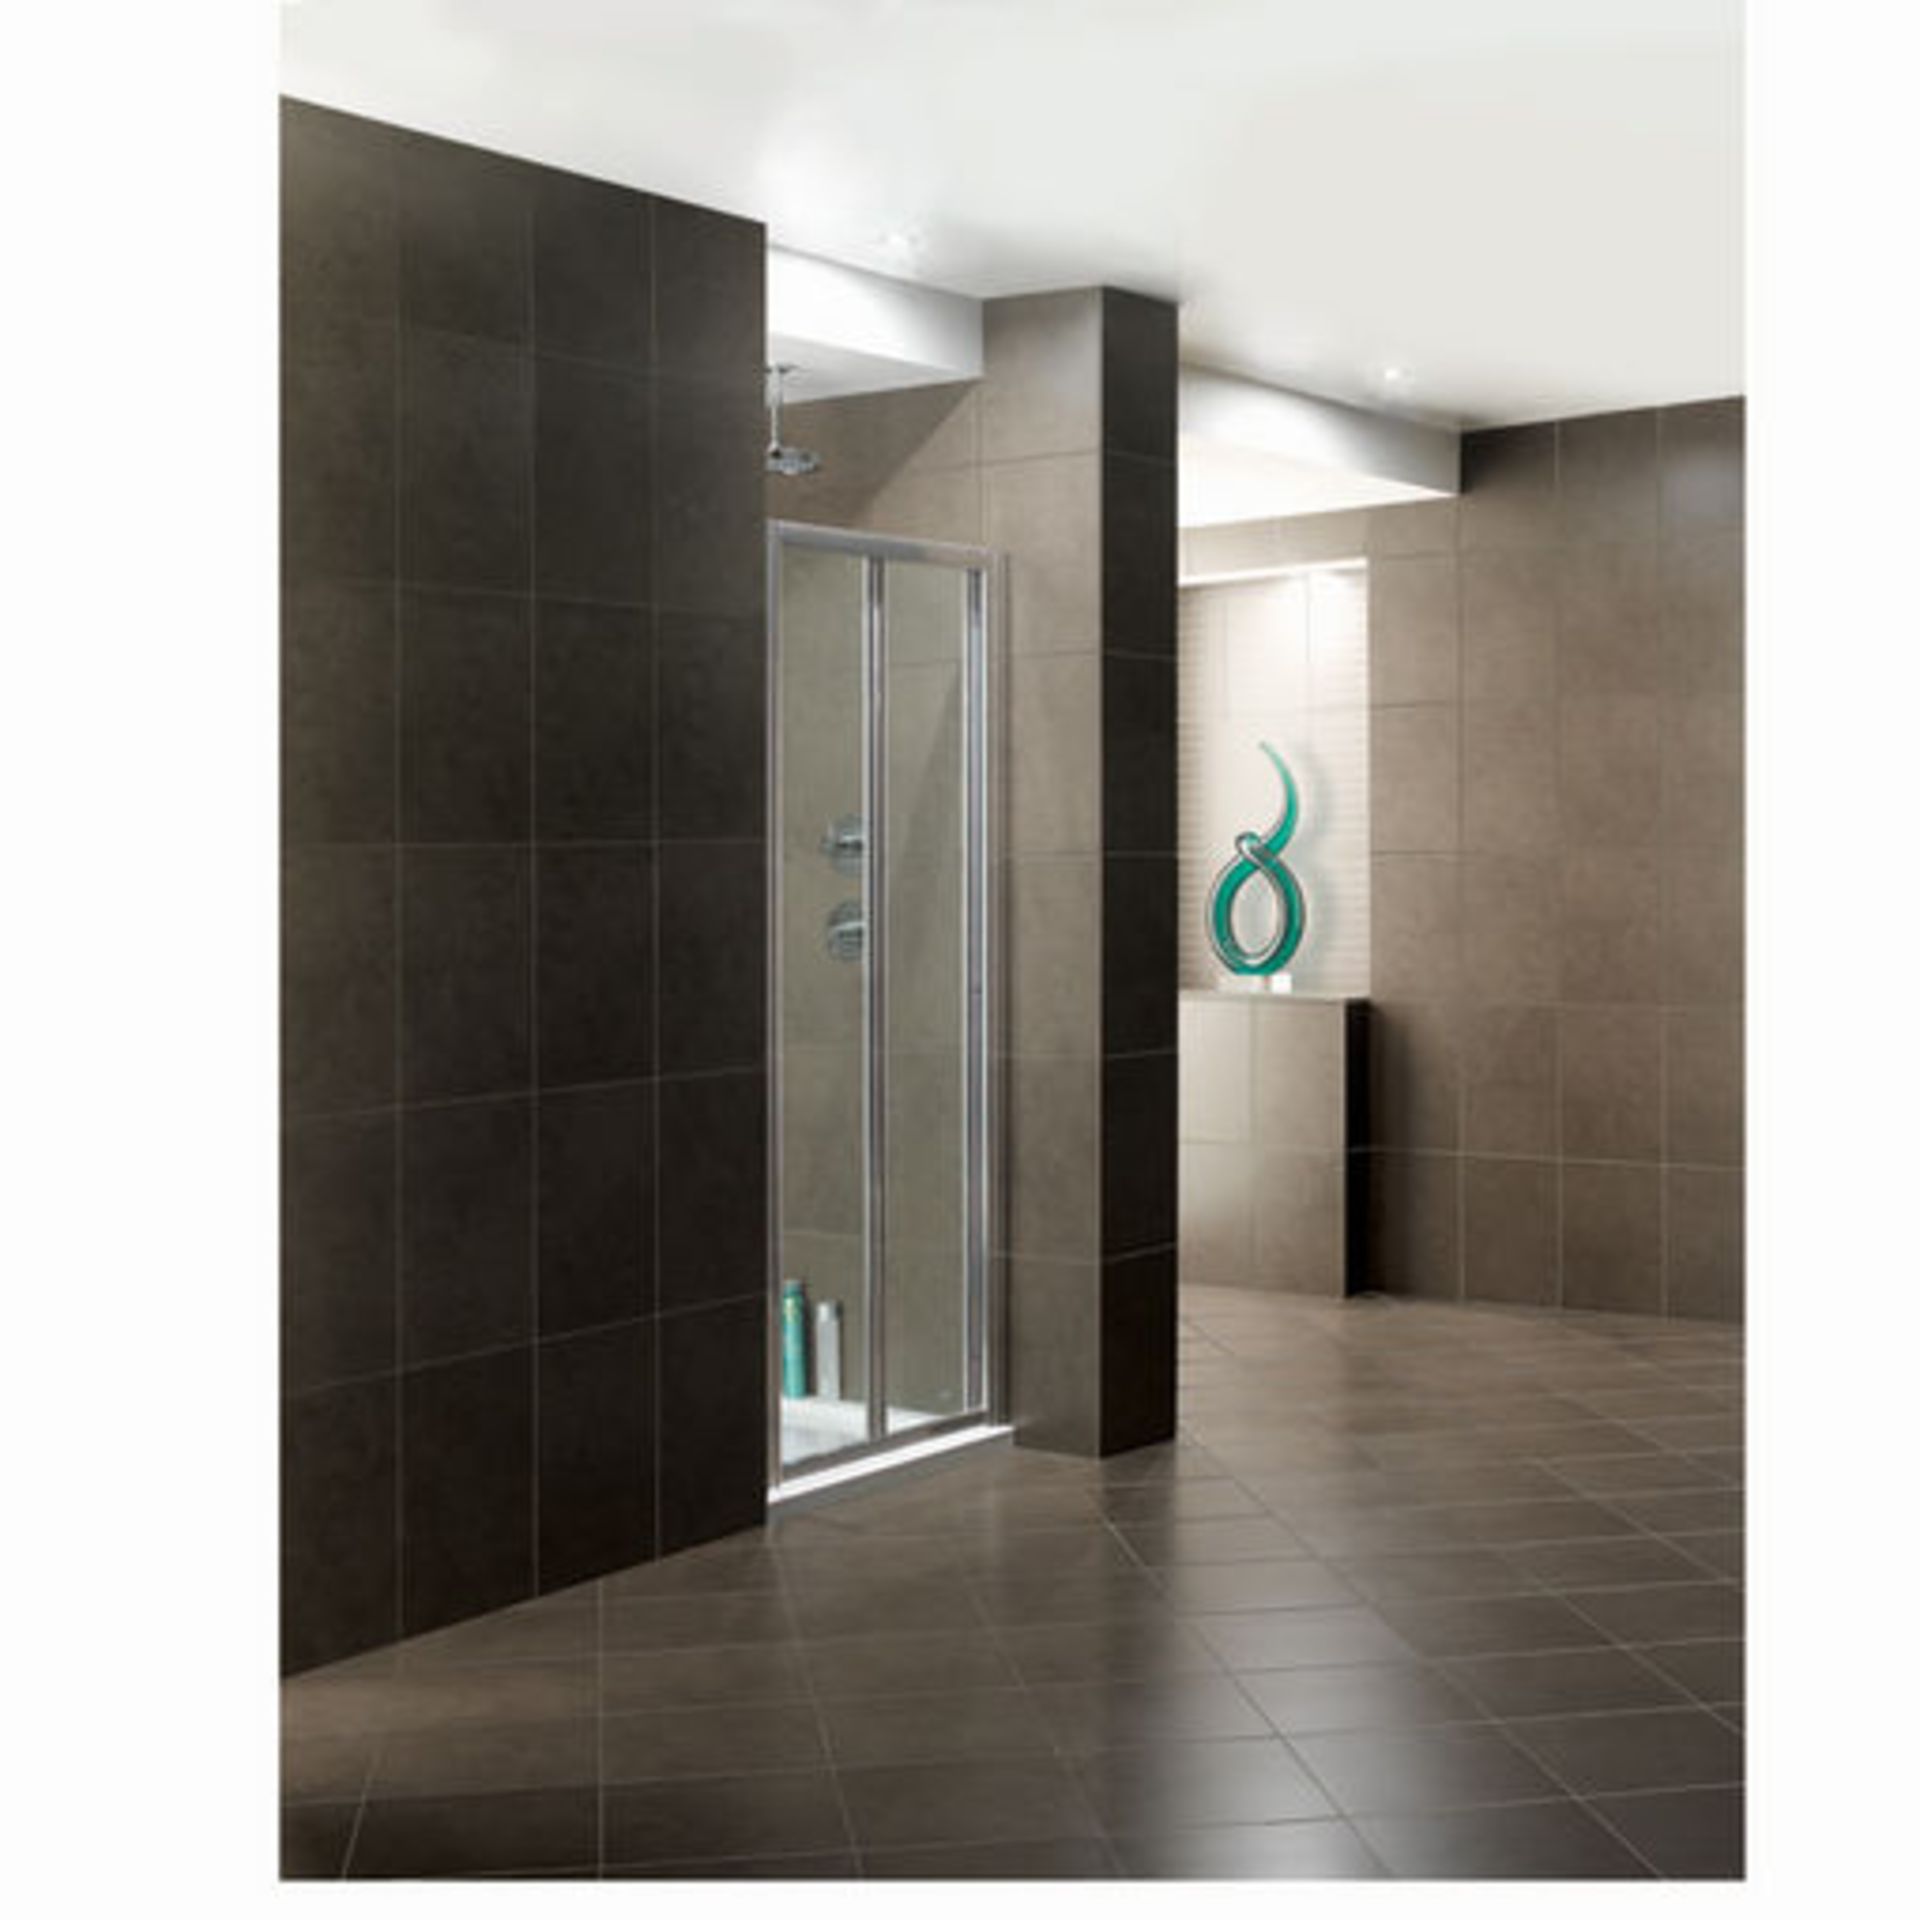 2 x Vogue SULIS Bifold Shower Doors - 800mm Width - 6mm Clear Glass - T Bar Handles - Unused Boxed